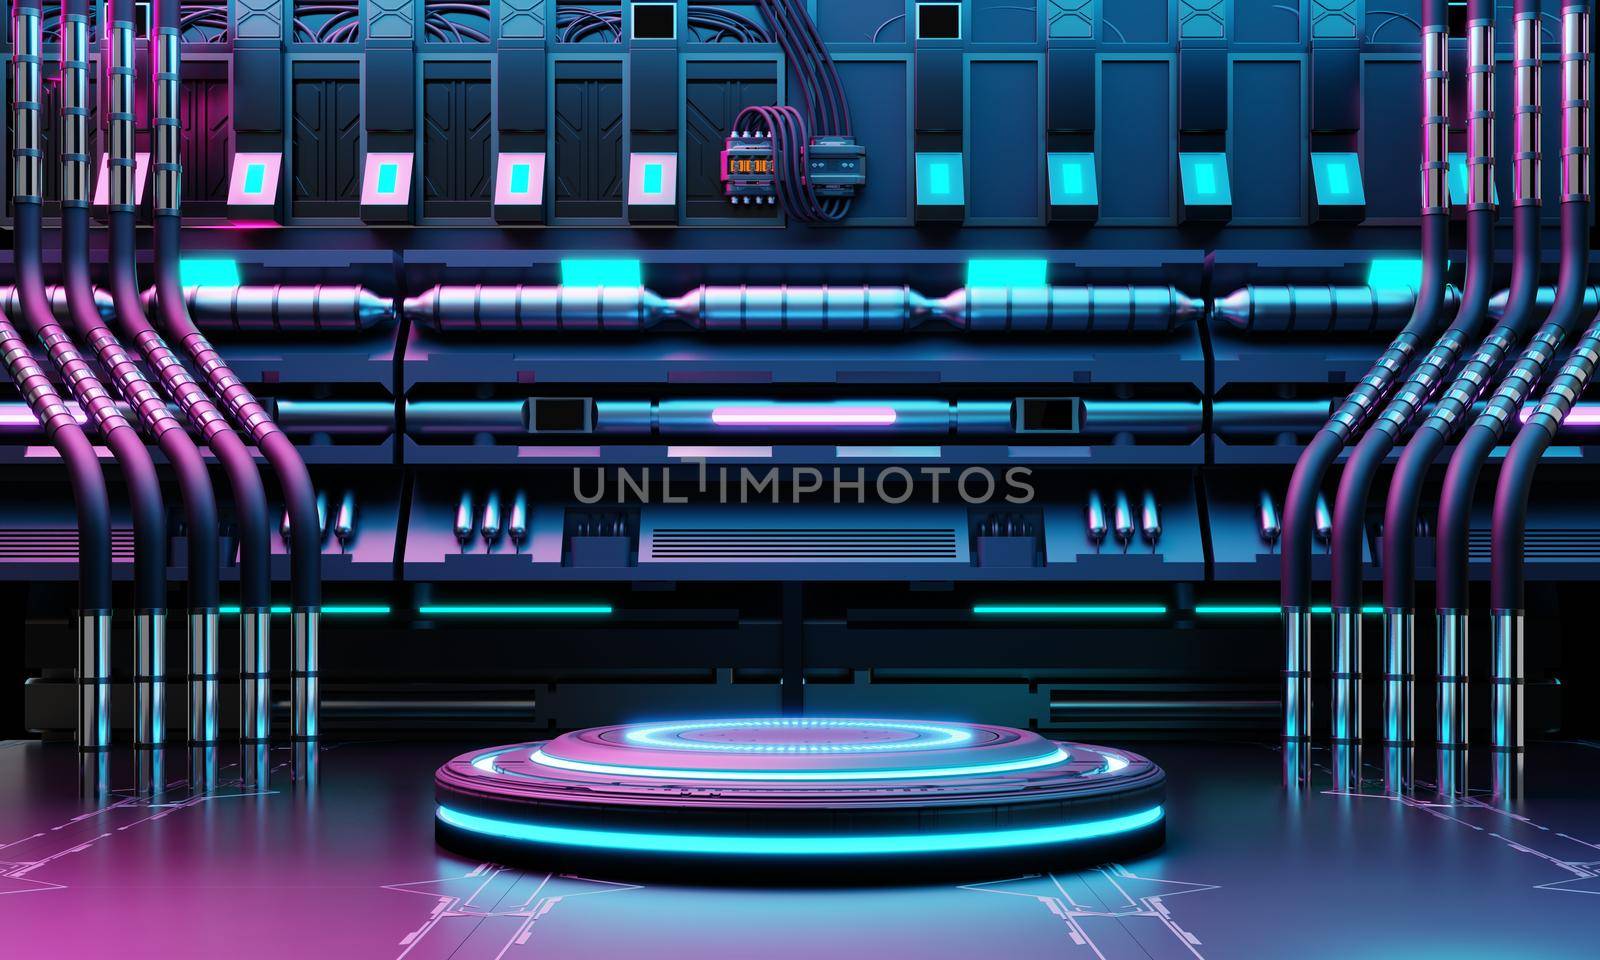 Cyberpunk sci-fi product podium showcase in spaceship base with blue and pink background. Technology and object concept. 3D illustration rendering